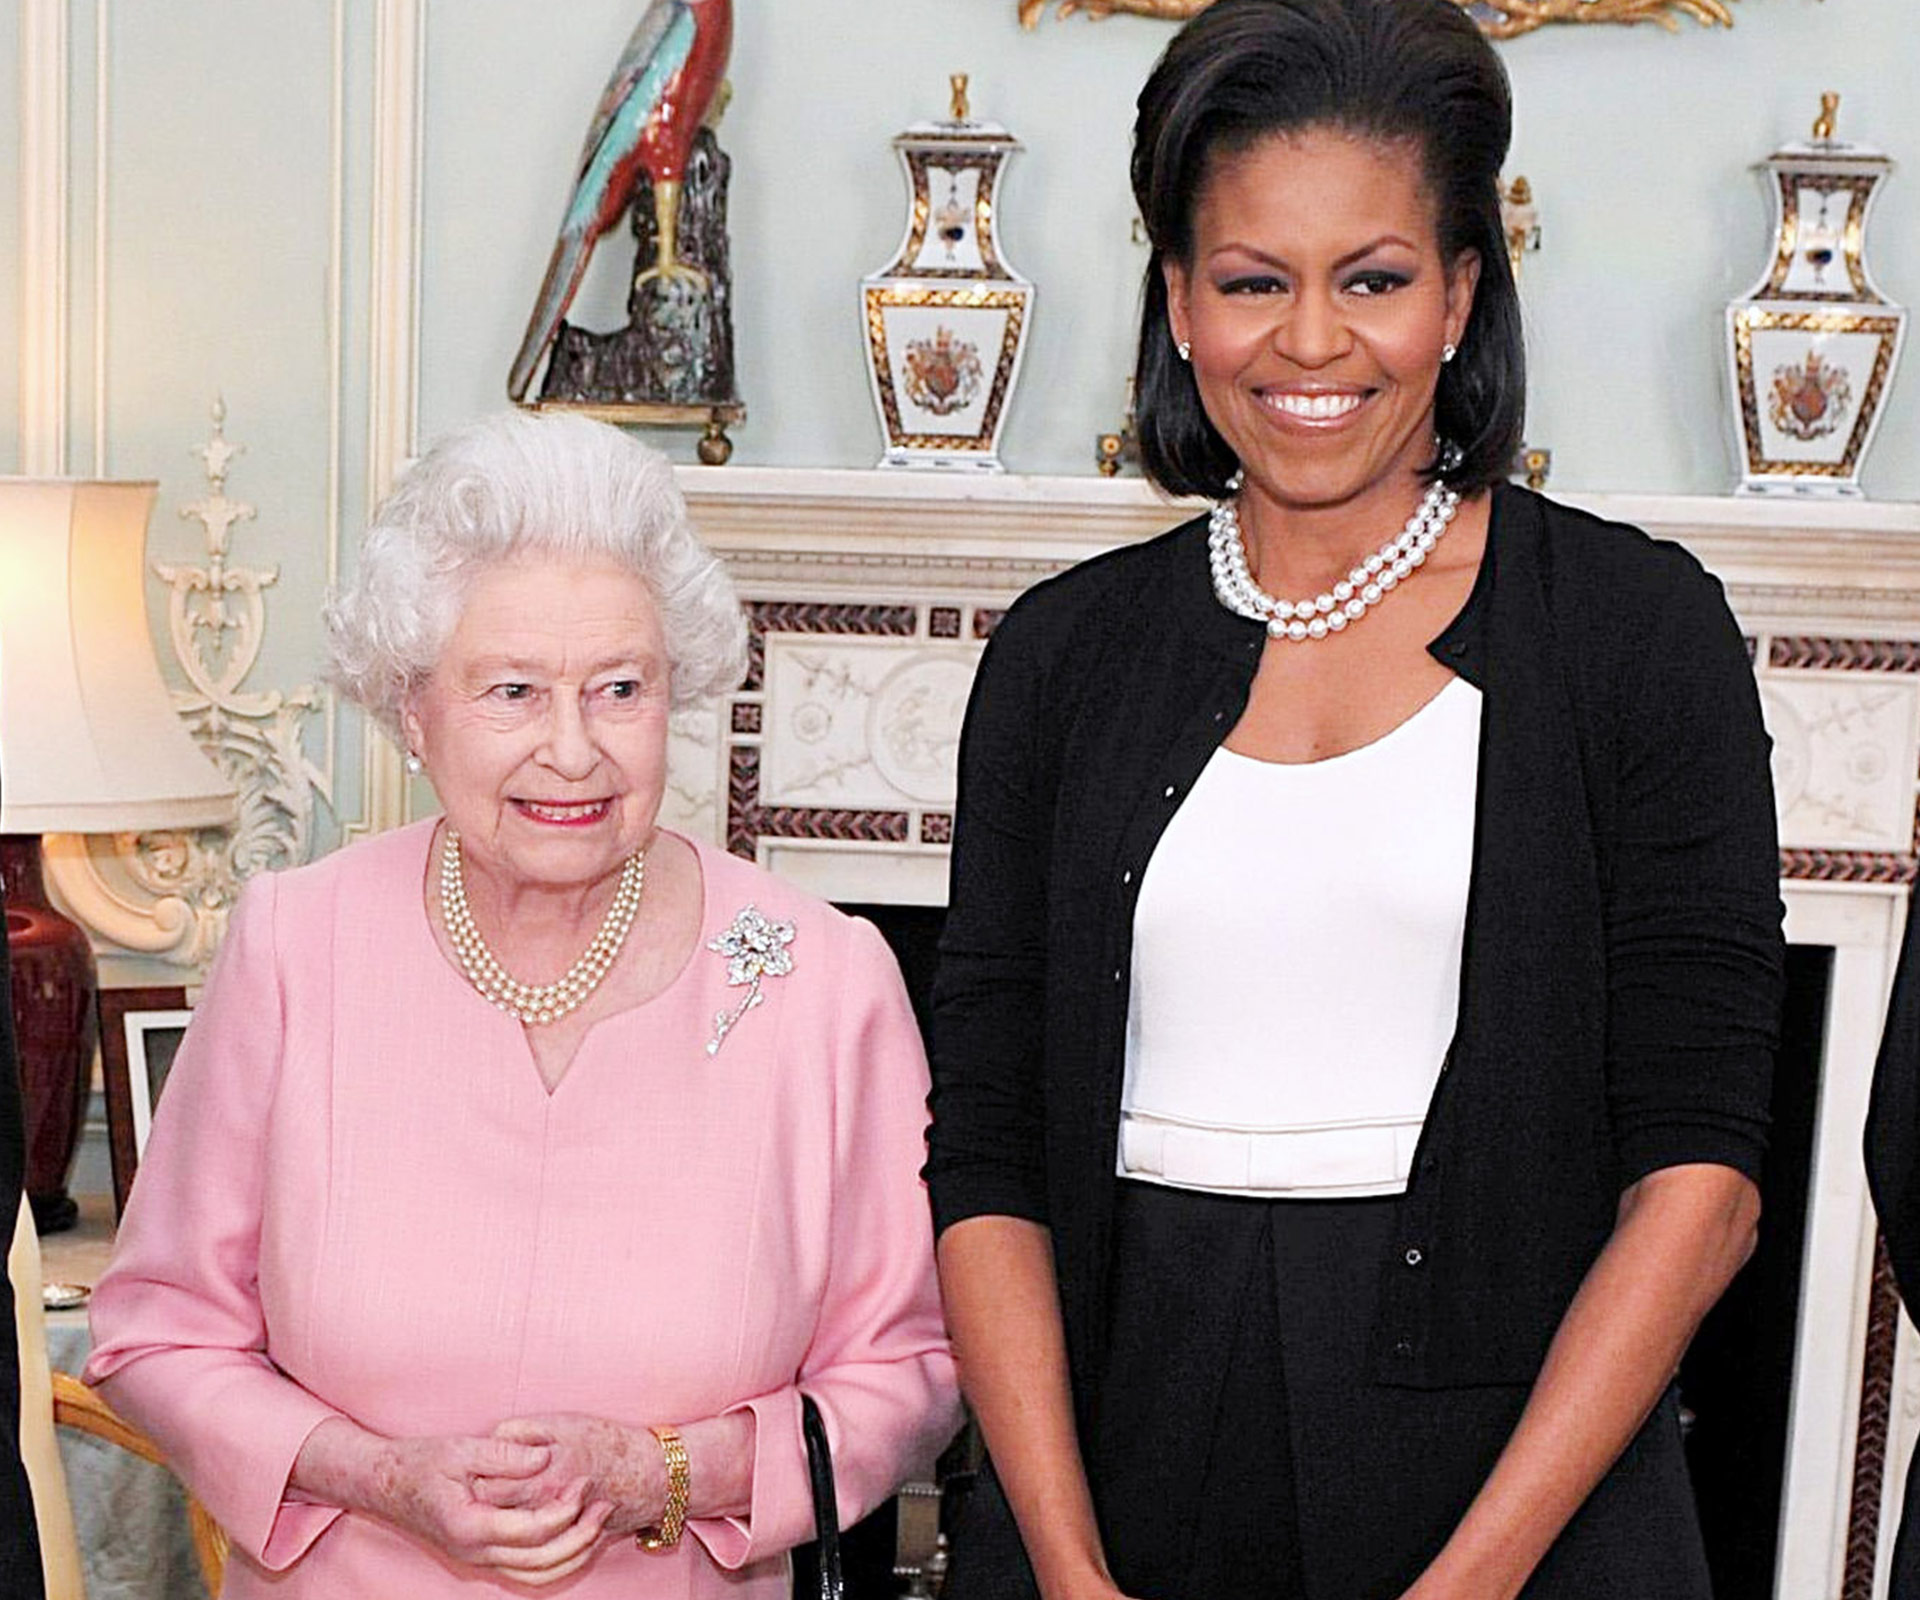 Michelle Obama had french fries at a Buckingham Palace sleepover